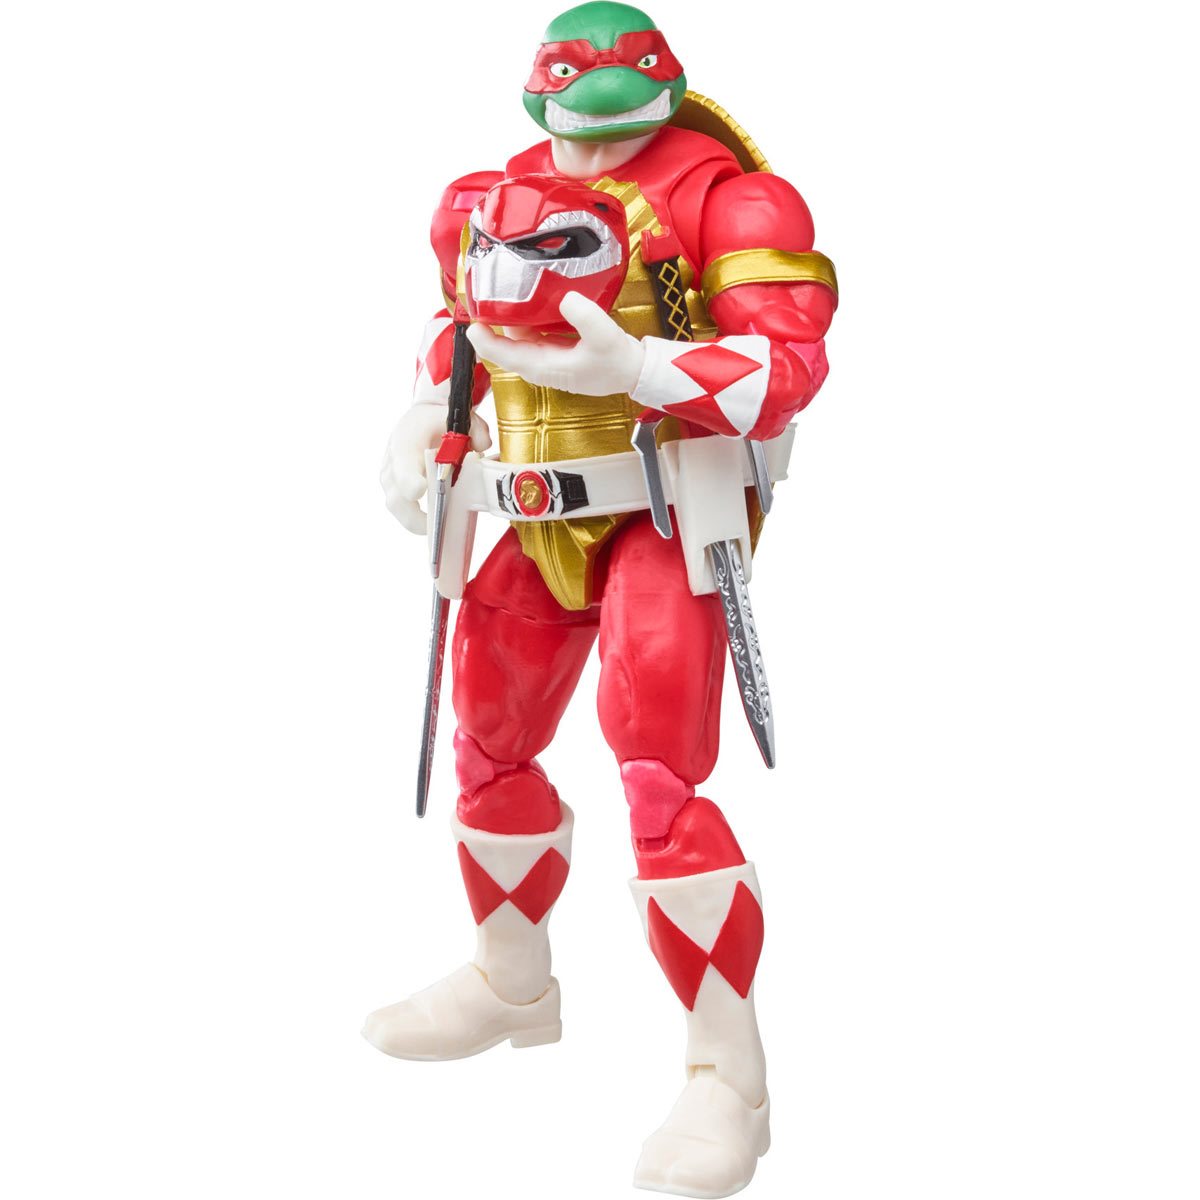 Power Rangers X Teenage Mutant Ninja Turtles Lightning Collection Foot Tommy and Raphael Red Action Figures